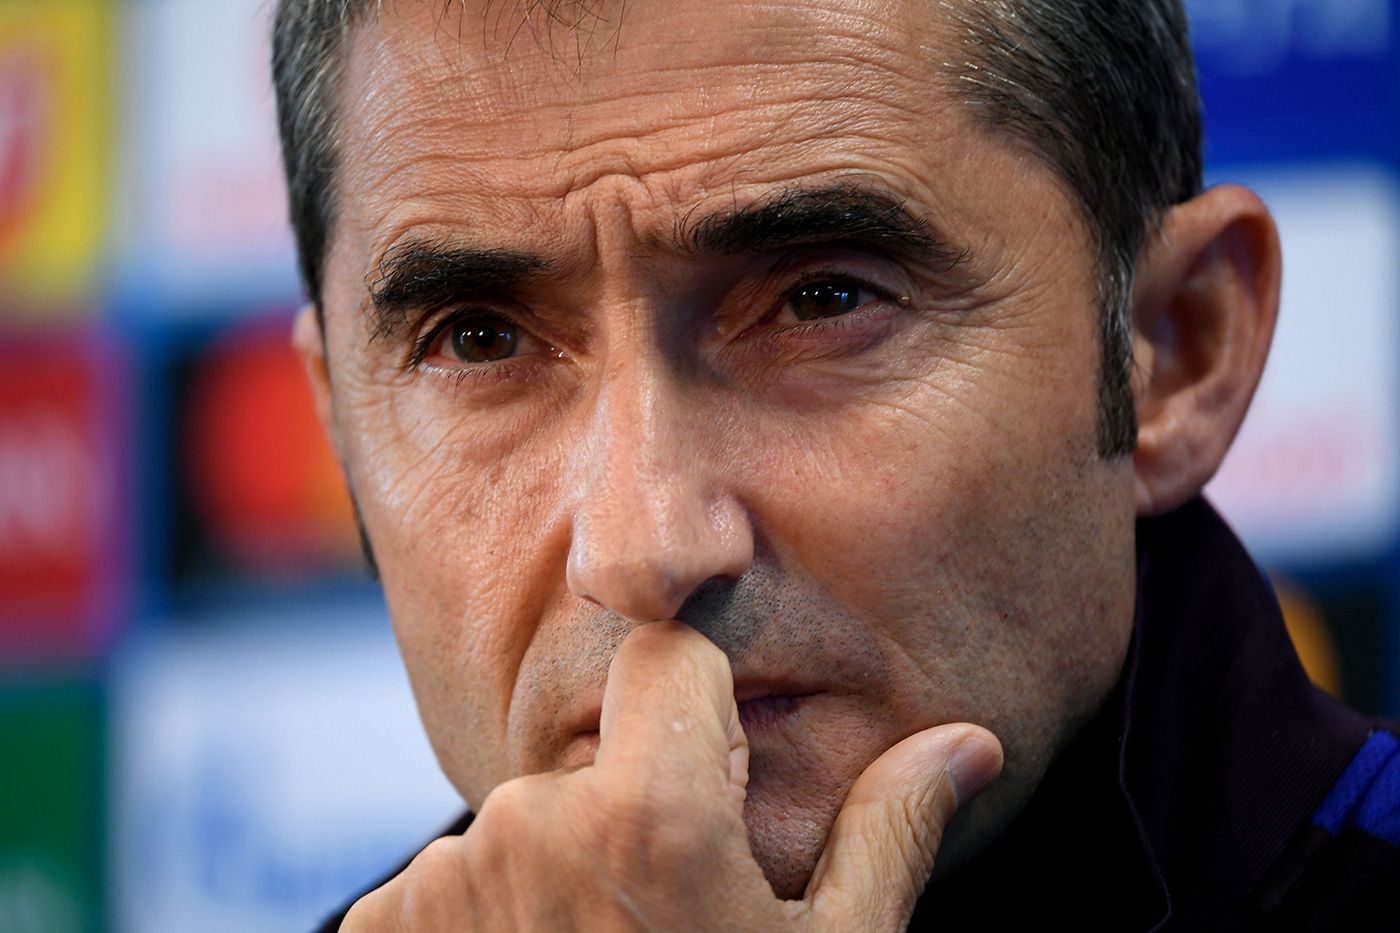 Valverde In a press conference with the FC Barcelona